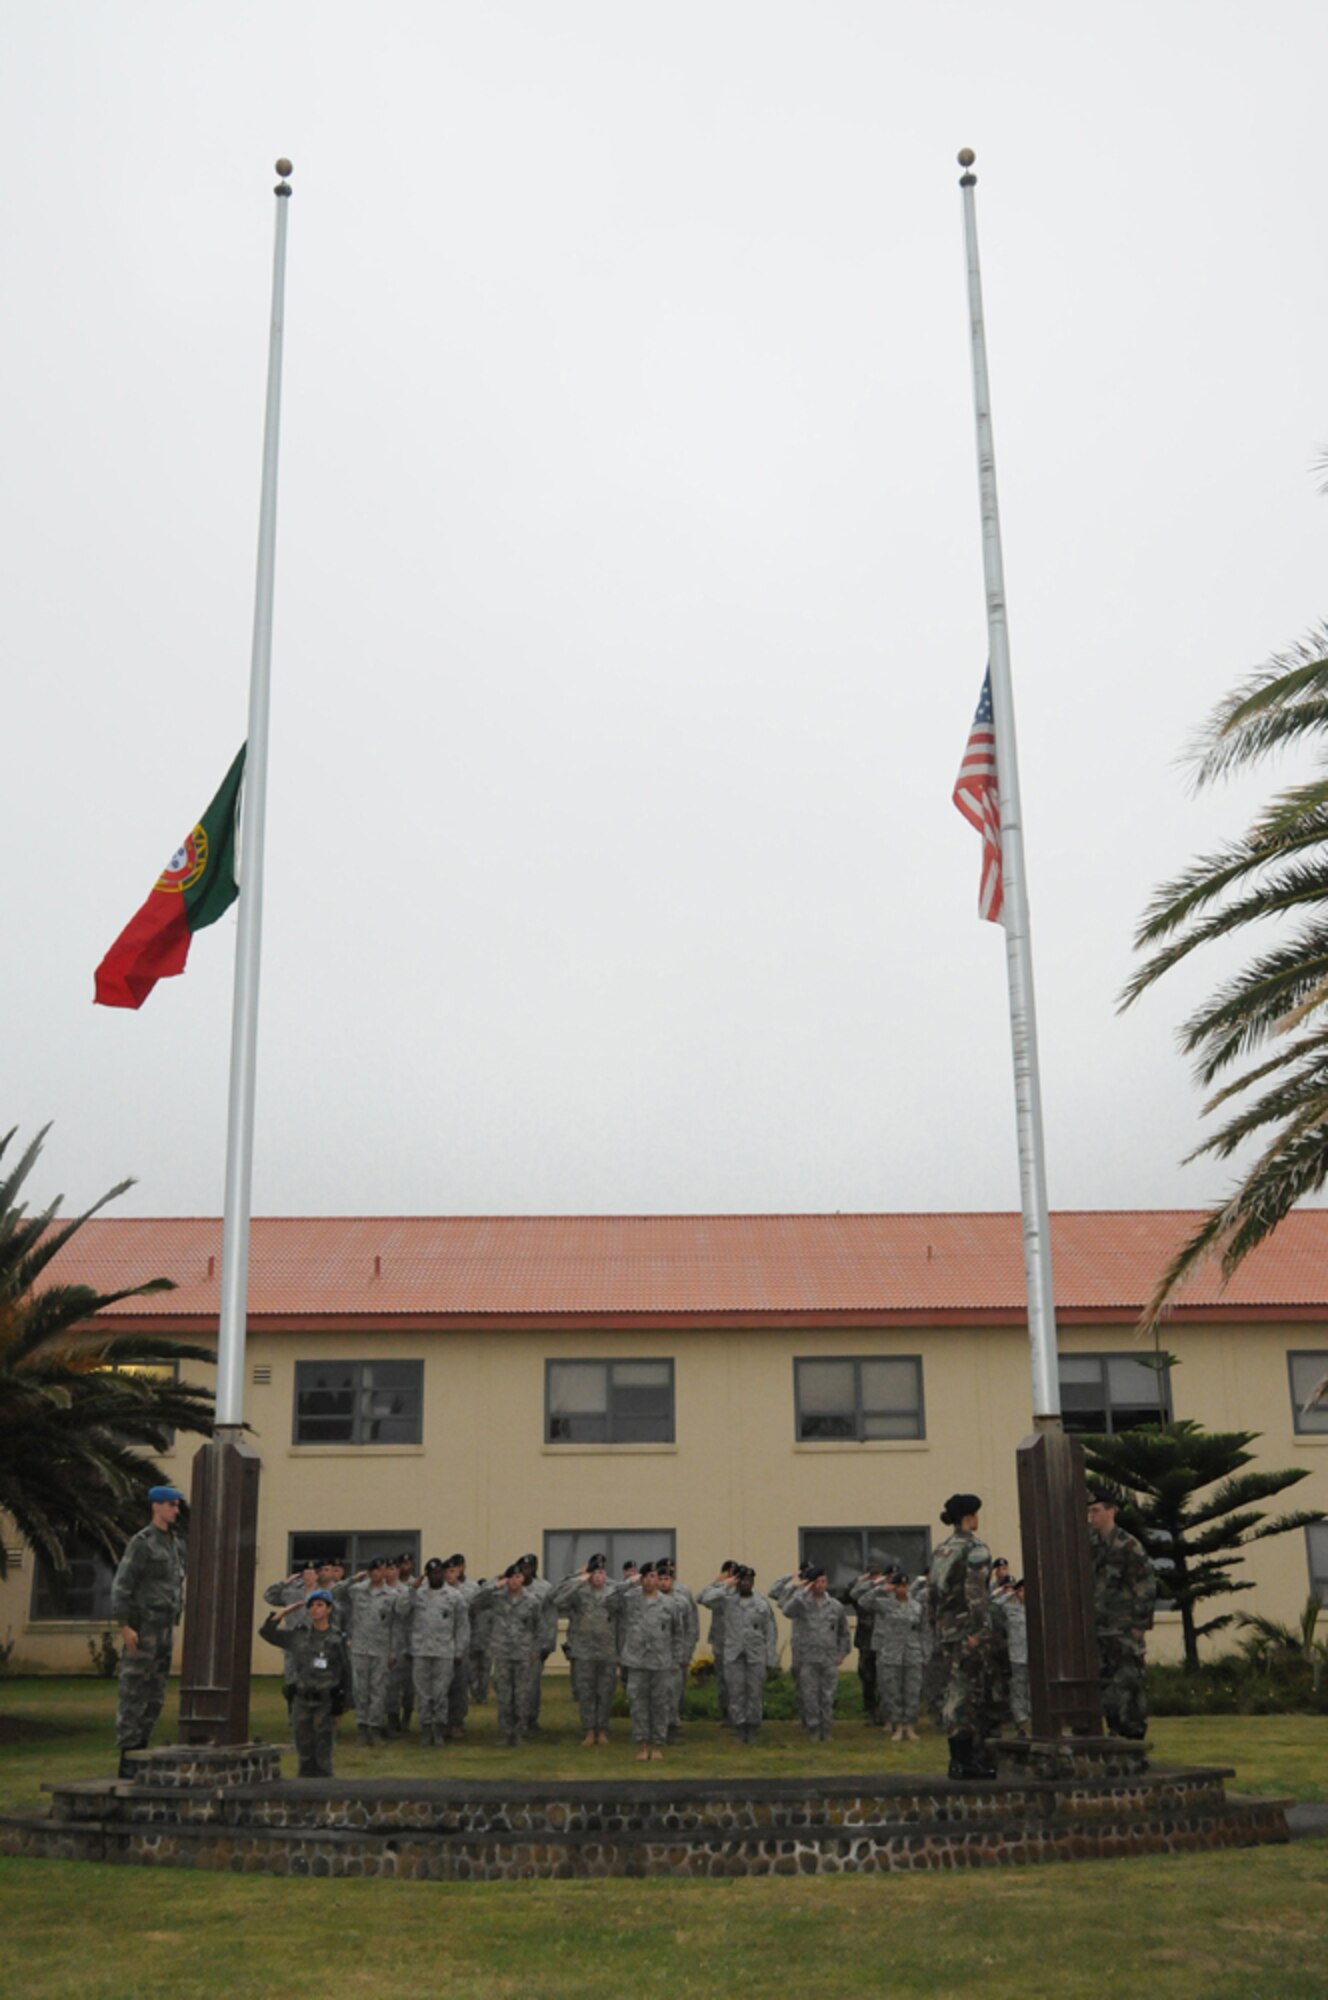 Members of the 65th Security Forces Squadron, at Lajes Field, salute as the American and Portuguese flags are flown half staff in honor of Senior Airman Amber Finell, 65th Security Forces Squadron, at Lajes Field, July 2.  Airman Finnell is from East Tawas, Mich. and entered the Air Force in Feb. 2004.  She had been previously stationed at Minot AFB, N.D. and Sather AB, Baghdad, Iraq; she passed away on June 30, 2009.  (U.S. Air Force photo by Tech Sgt. Rebecca F. Corey)